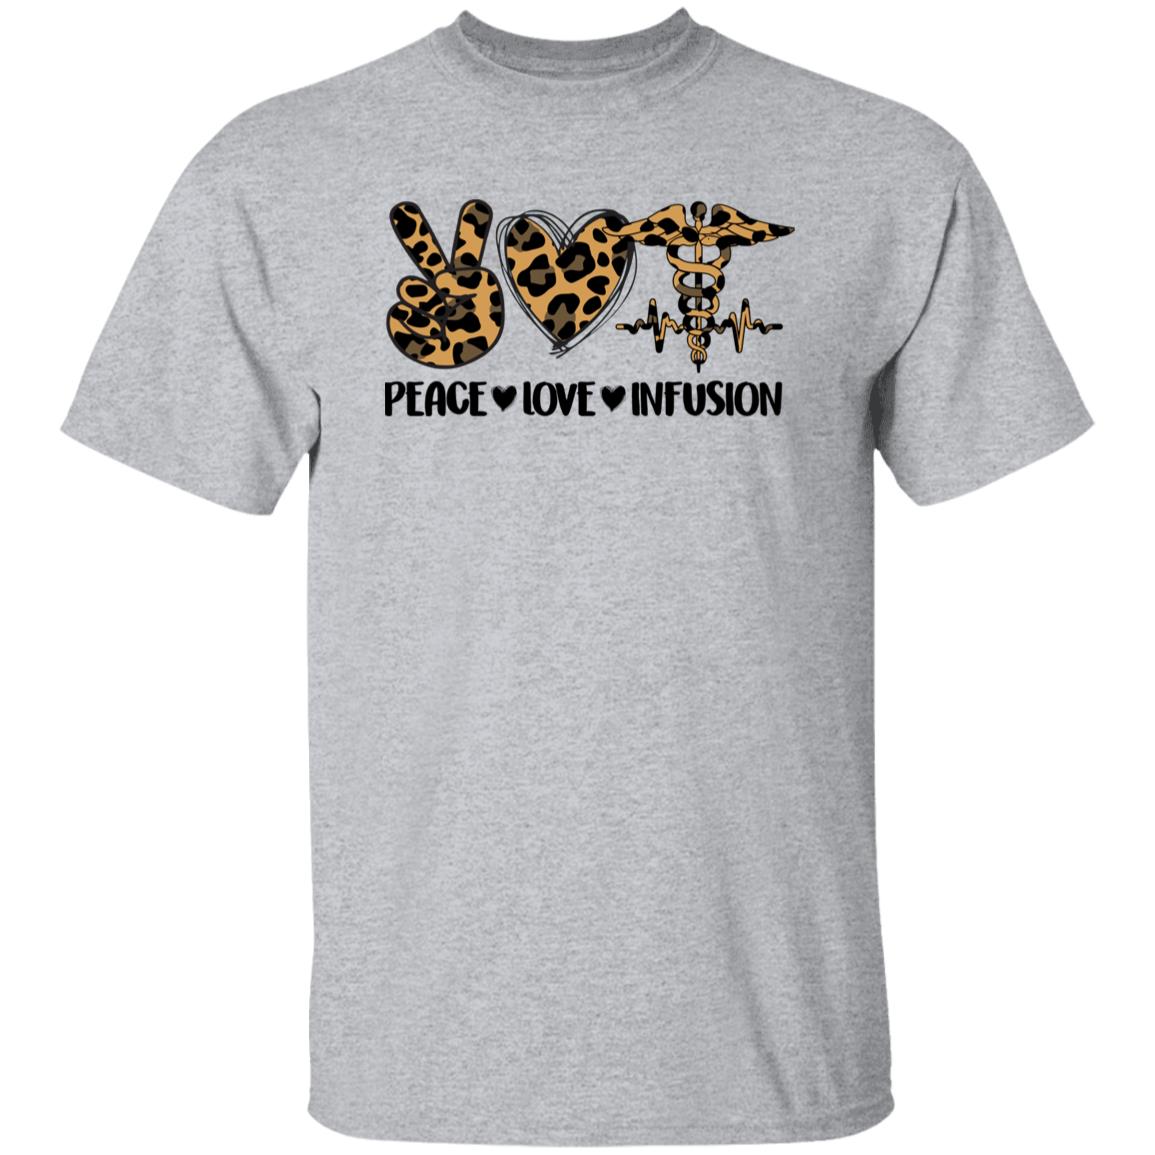 Peace Love Infusion T-Shirt Leopard skin Oncology Infusion Nurse Unisex Tee Sand White Sport Grey-Family-Gift-Planet